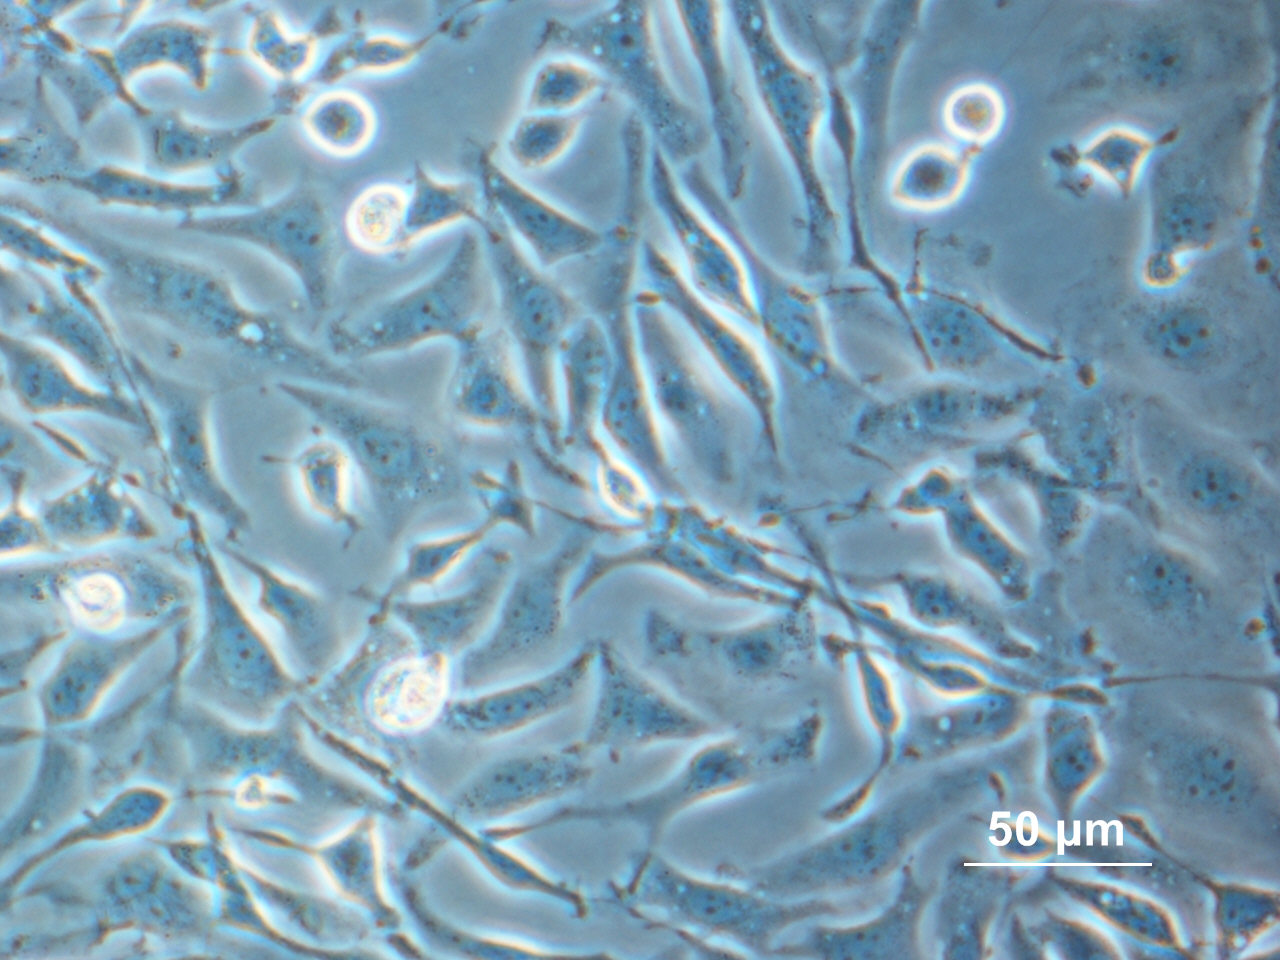 Chinese Hamster Ovary (CHO) cells